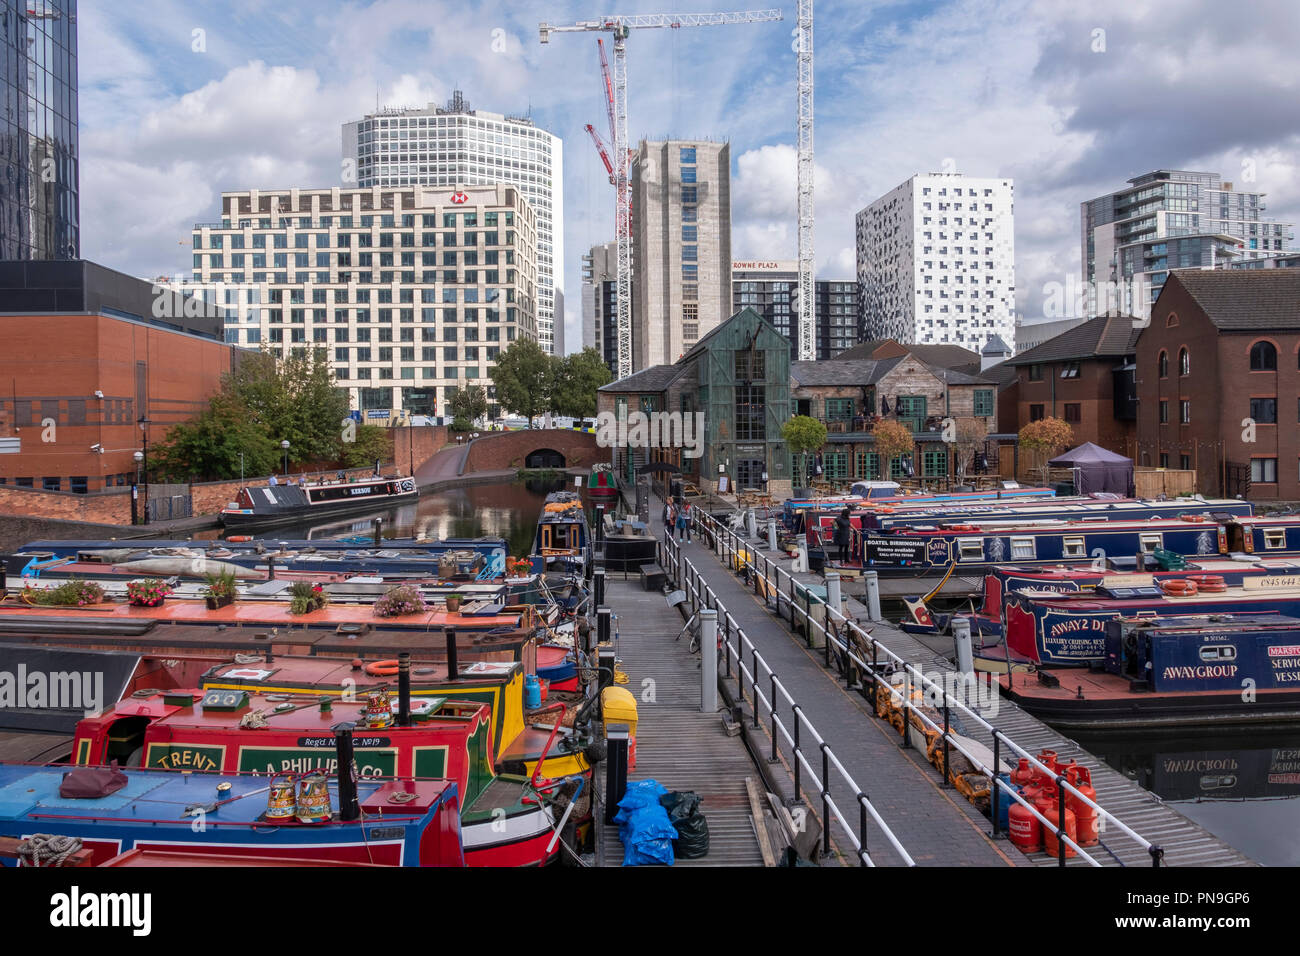 HSBC Headquarters in central Birmingham, England, viewed from Gas Street Basin. Stock Photo